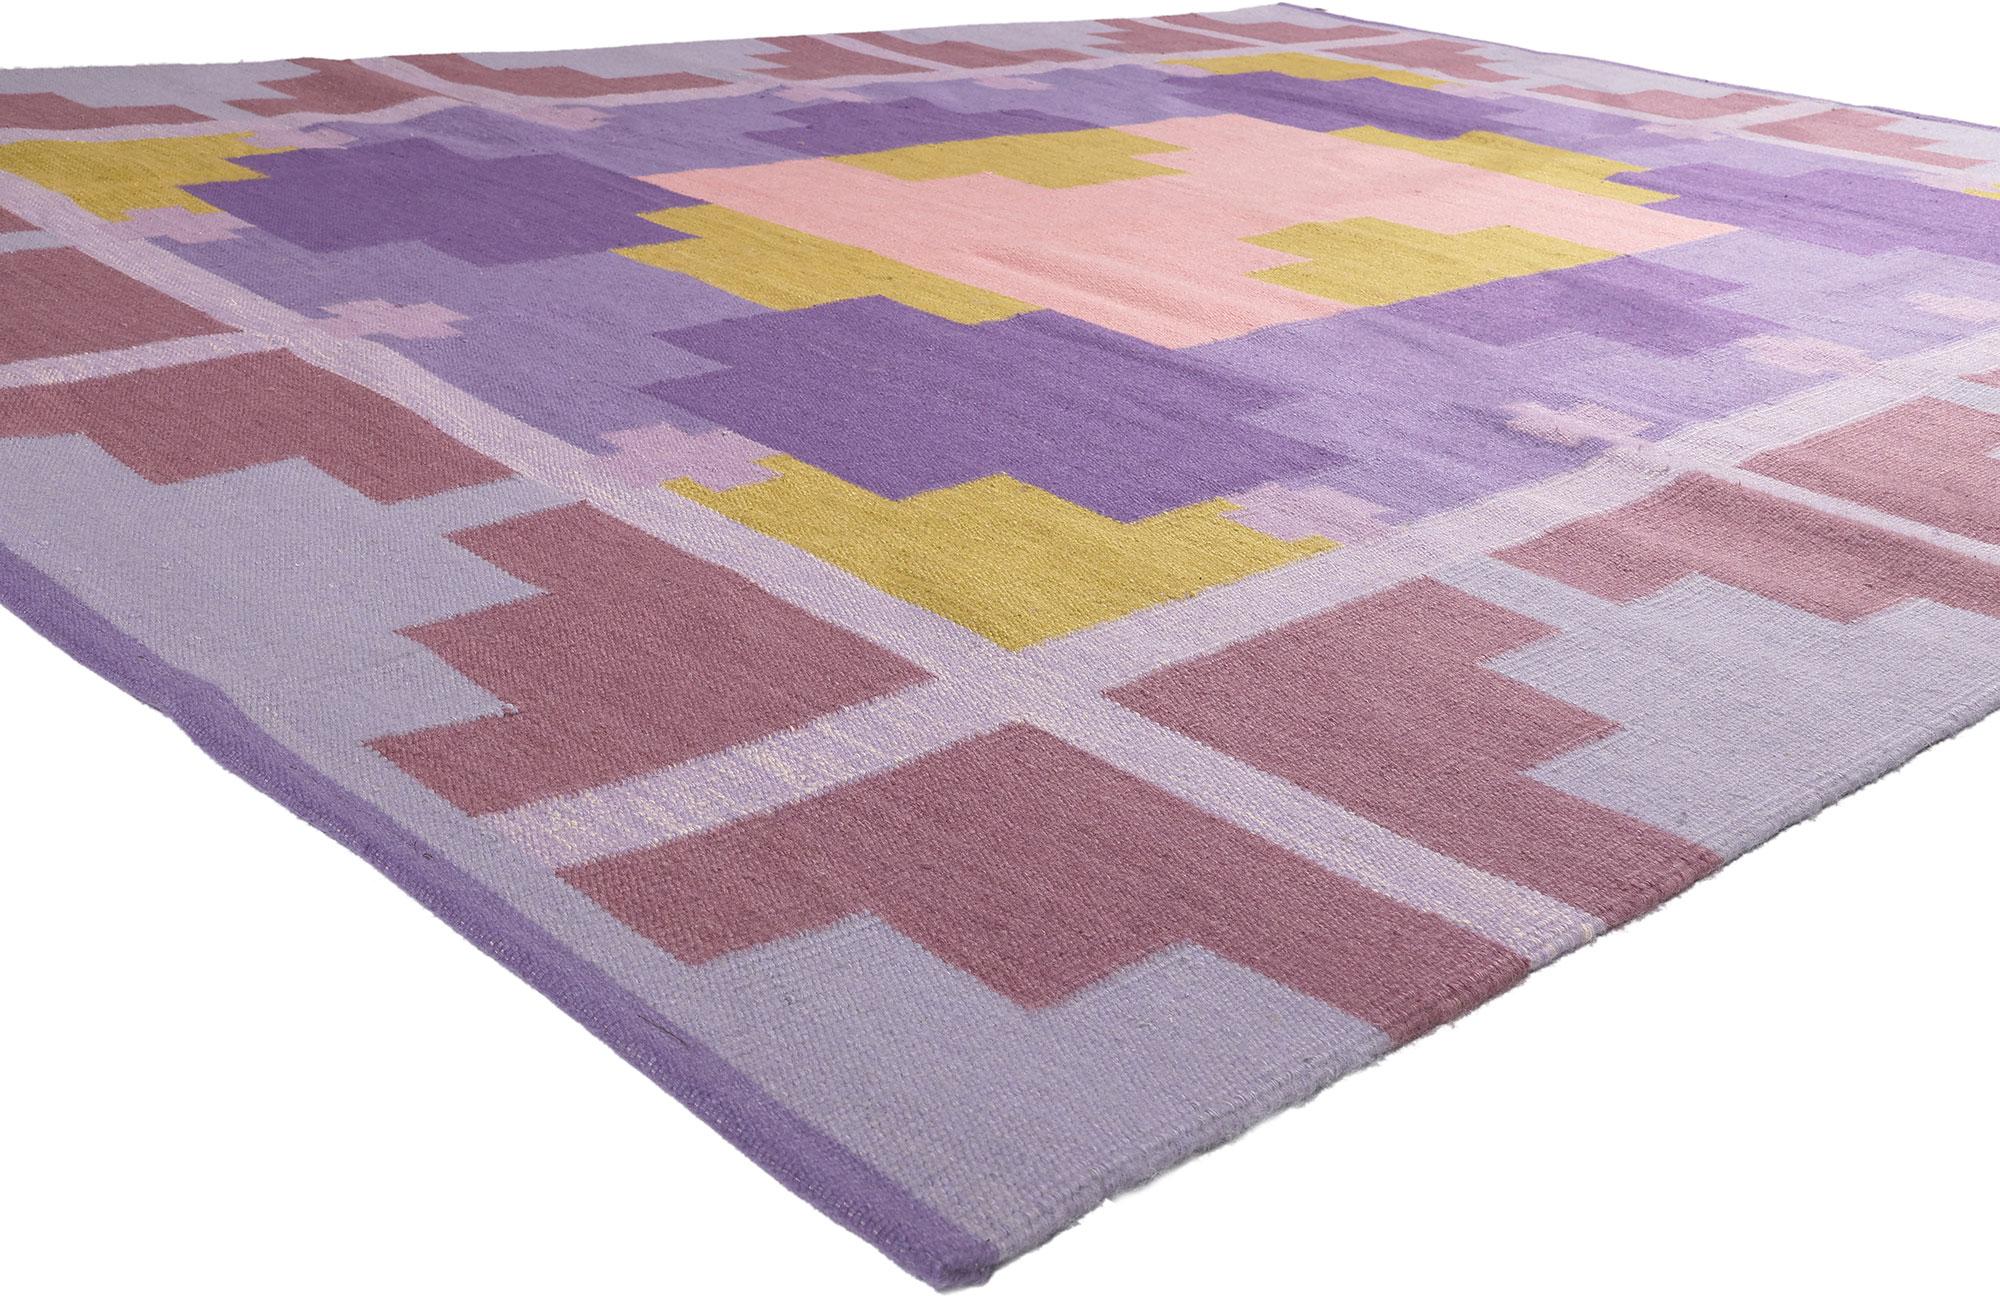 30964 New Swedish Inspired Kilim Rug, 09'01 x 11'11. Showcasing the bolder side of Scandinavian design, this handwoven Swedish style kilim rug is a captivating vision of woven beauty. The eye-catching geometric design and vibrant colorway woven into